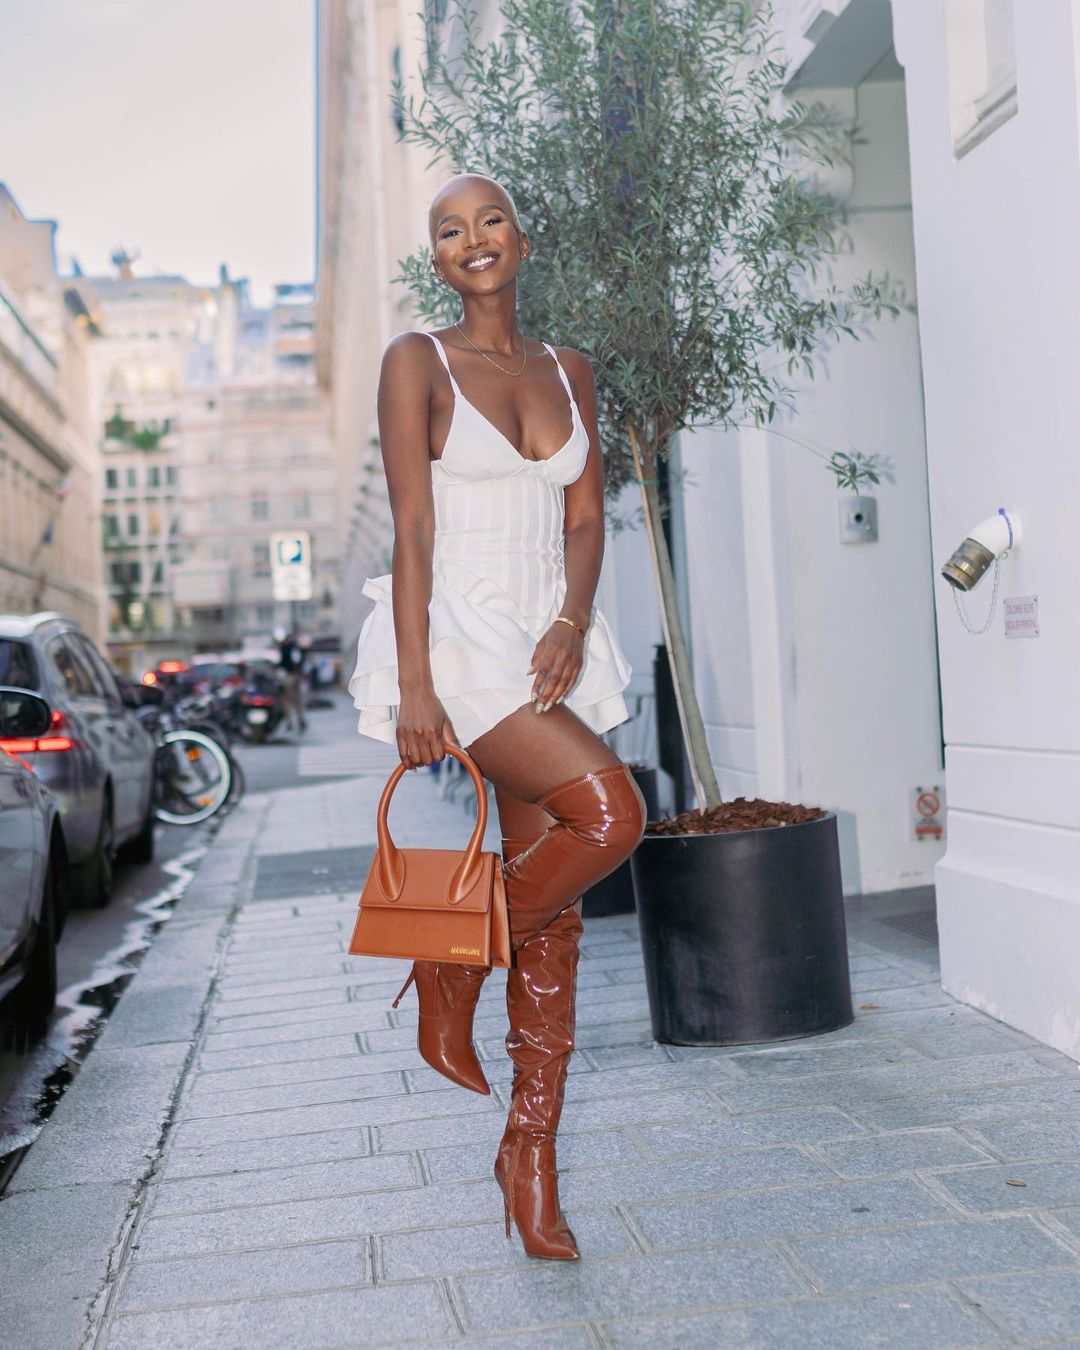 Shudufhadzo wearing a white dress and brown boots